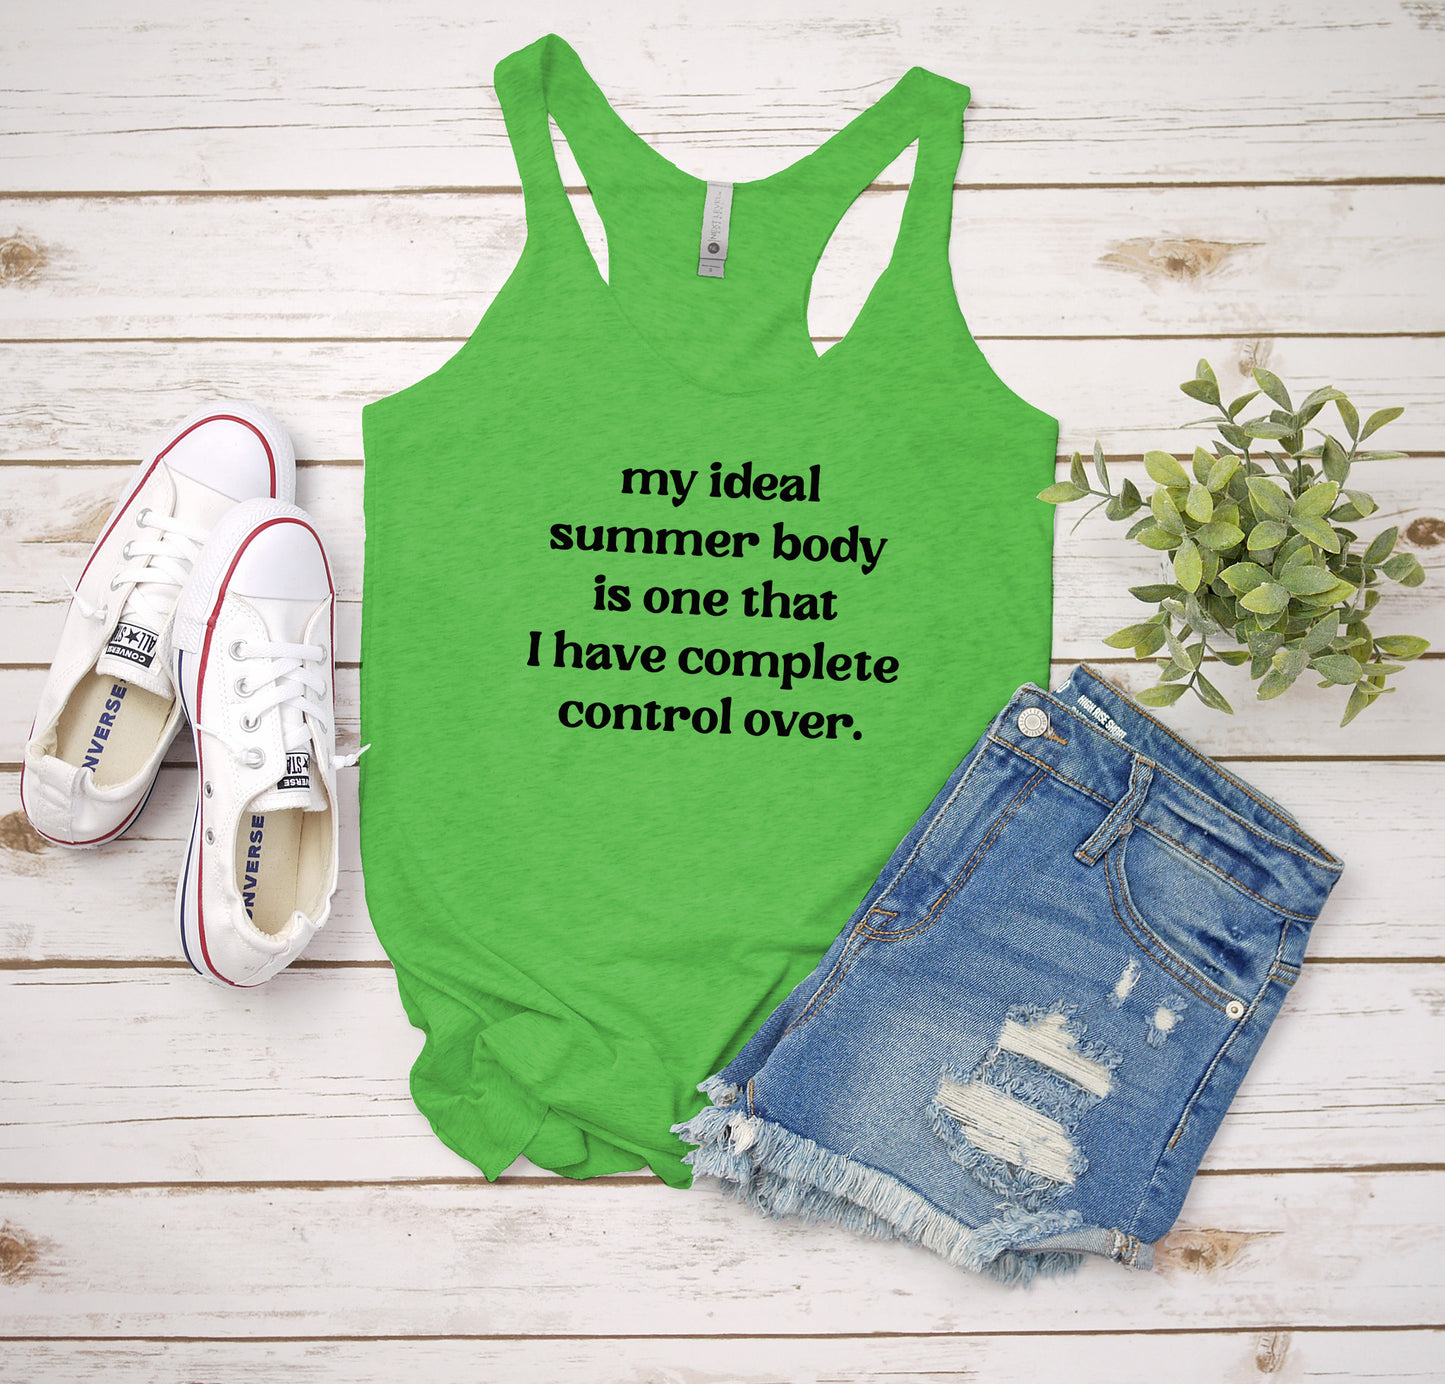 My Ideal Summer Body Is One I Have Complete Control Over - Women's Tank - Heather Gray, Tahiti, or Envy